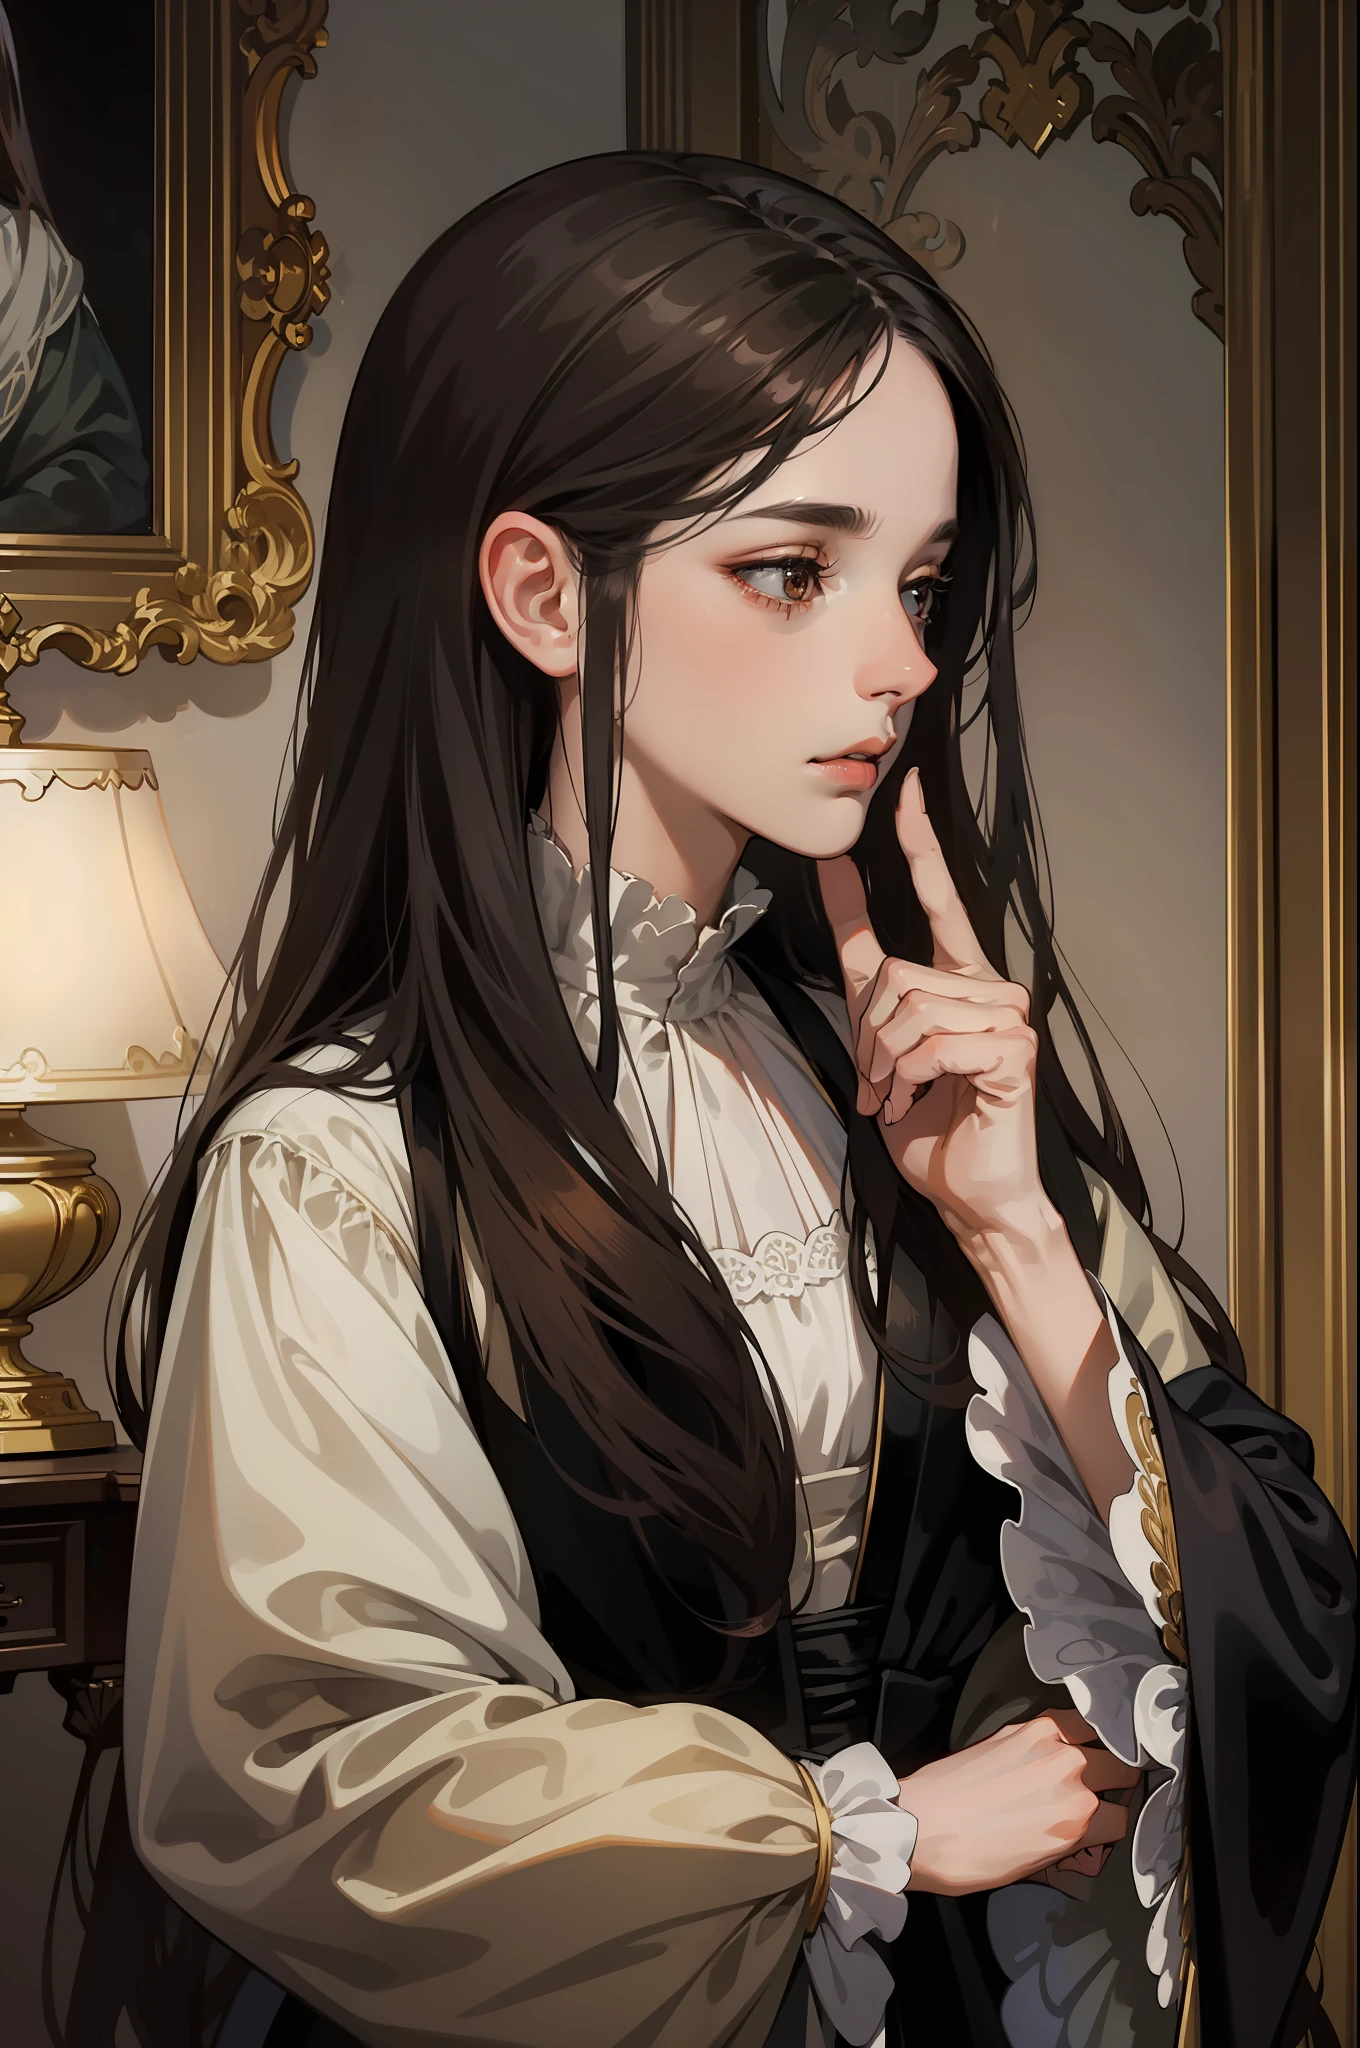 ((masterpieces)), best quality, outstanding illustration, a couple kissing, soft focus, 1 boy with long black hair, 1 girl with long brown hair, Victorian clothes, Victorian romanticism, opulent and exquisite atmosphere, soft light and warm lighting.